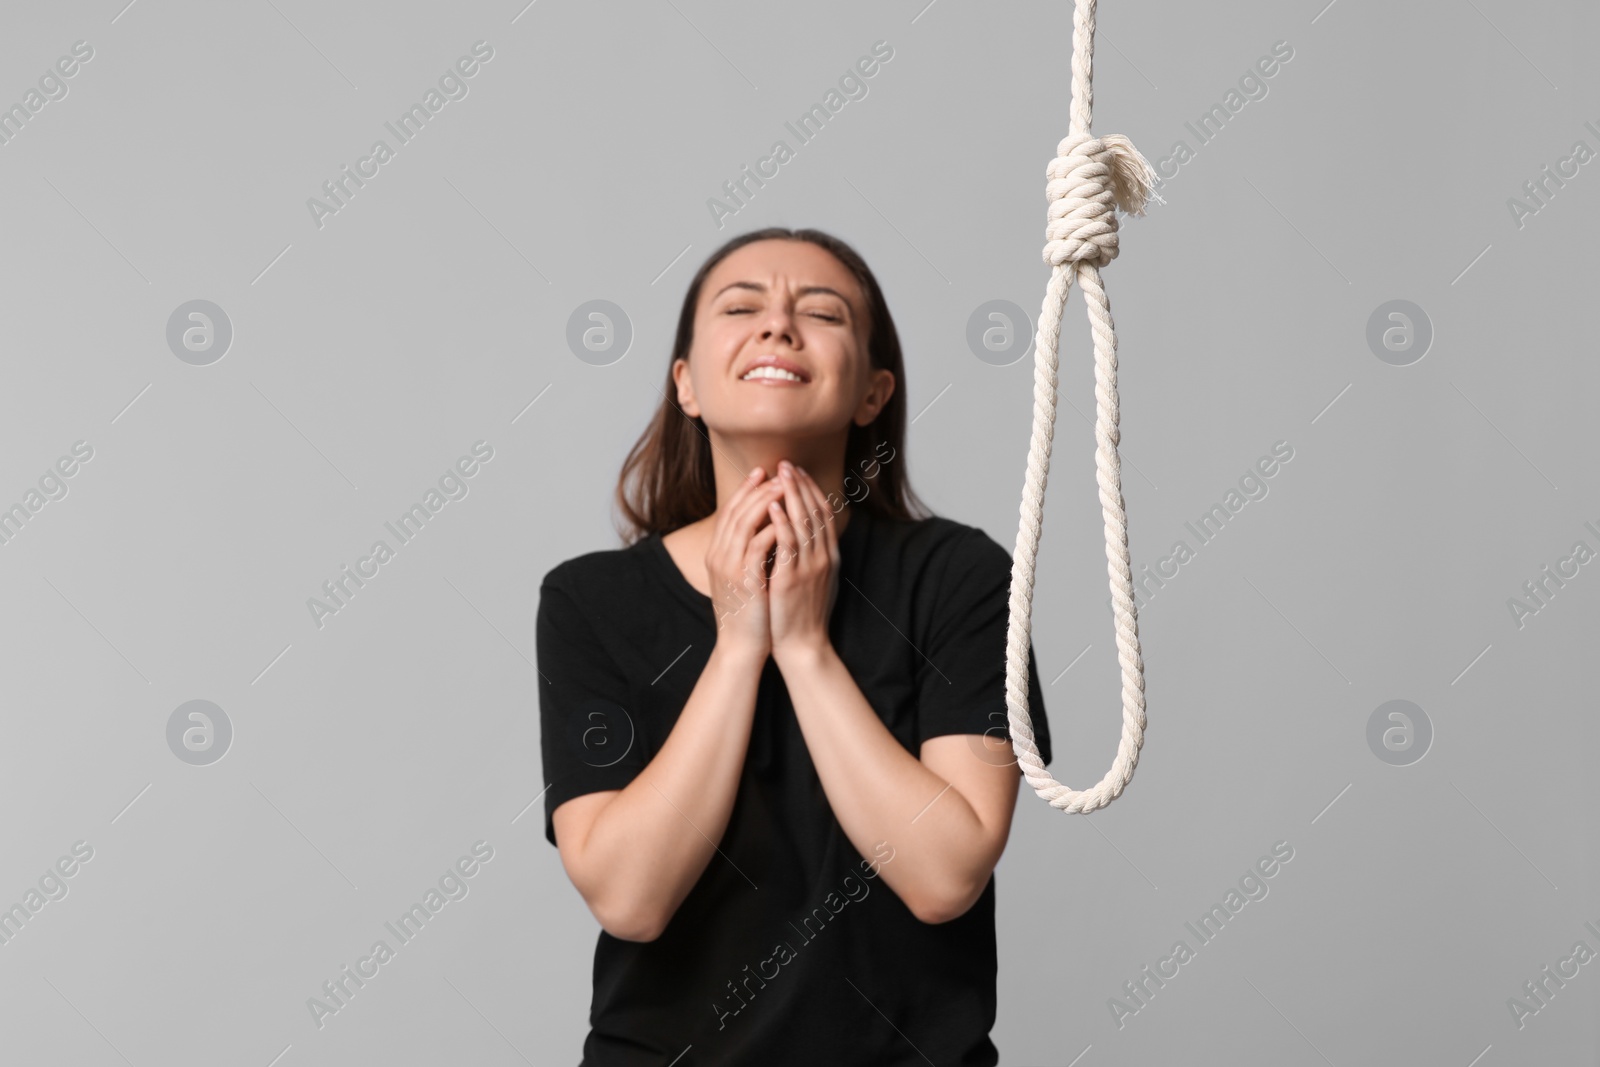 Photo of Depressed woman crying near rope noose on light grey background